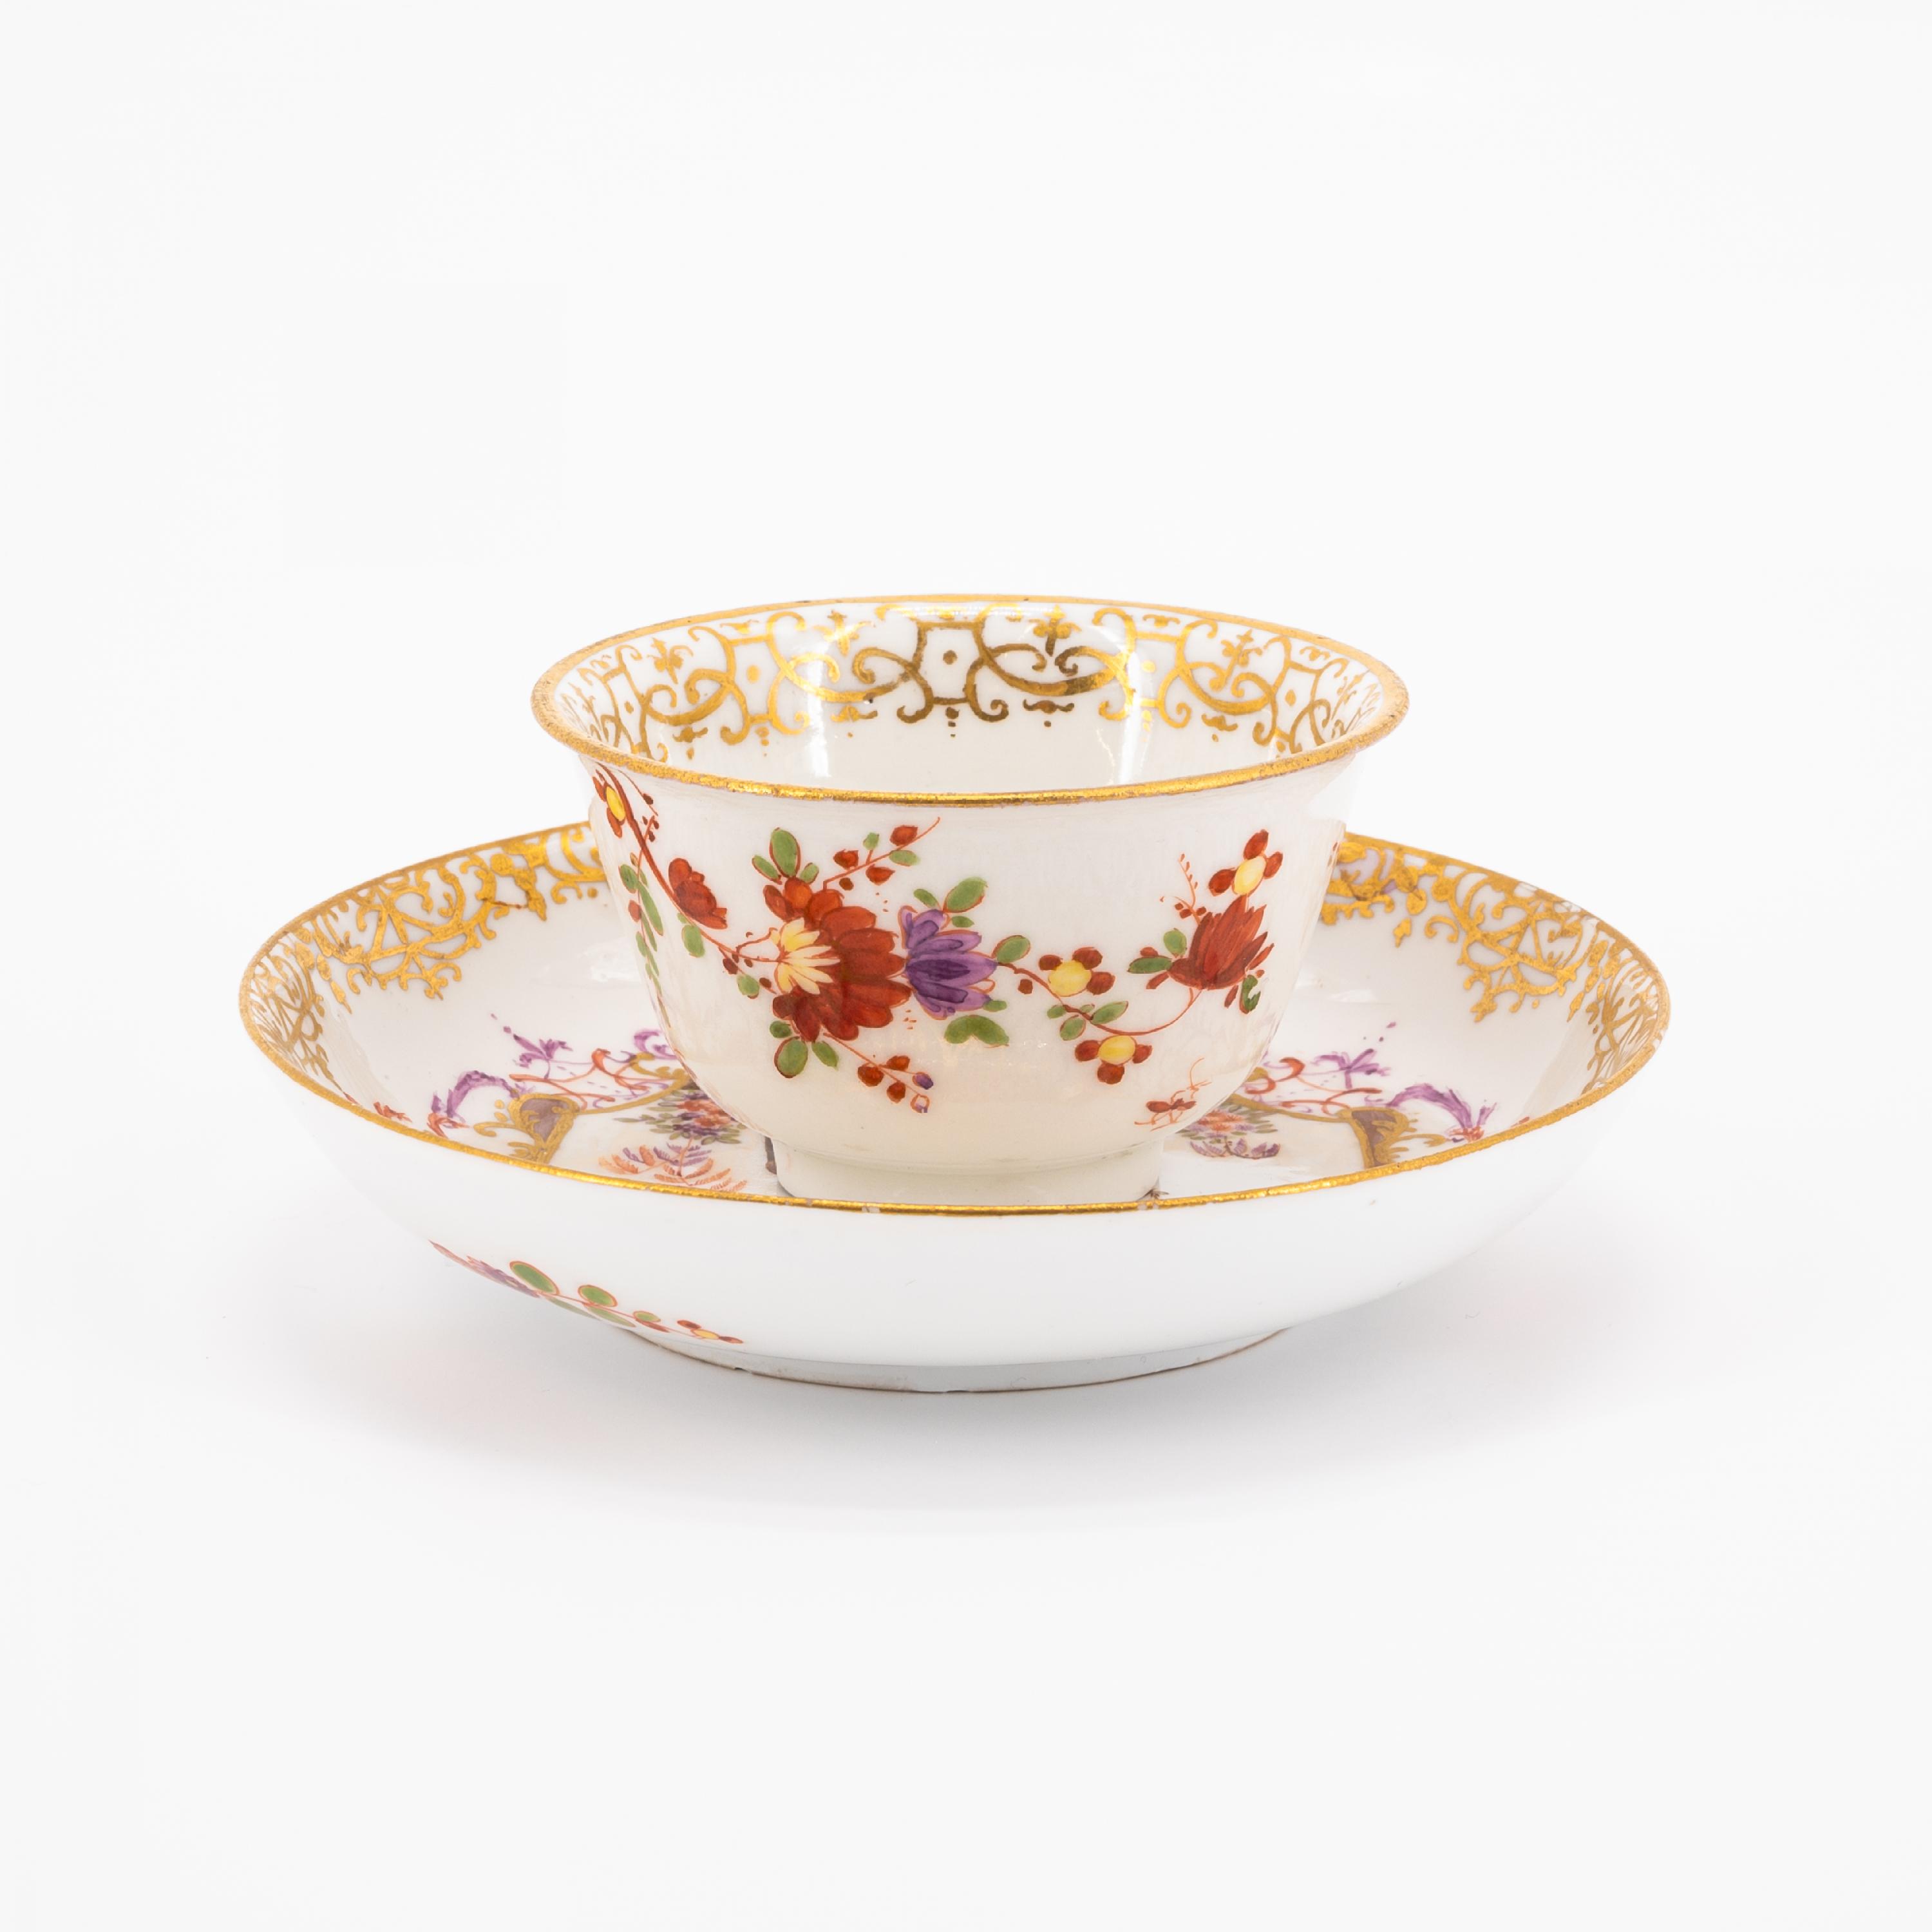 TWO PORCELAIN TEA BOWLS WITH SAUERES AND CHINOISERIES - Image 8 of 11